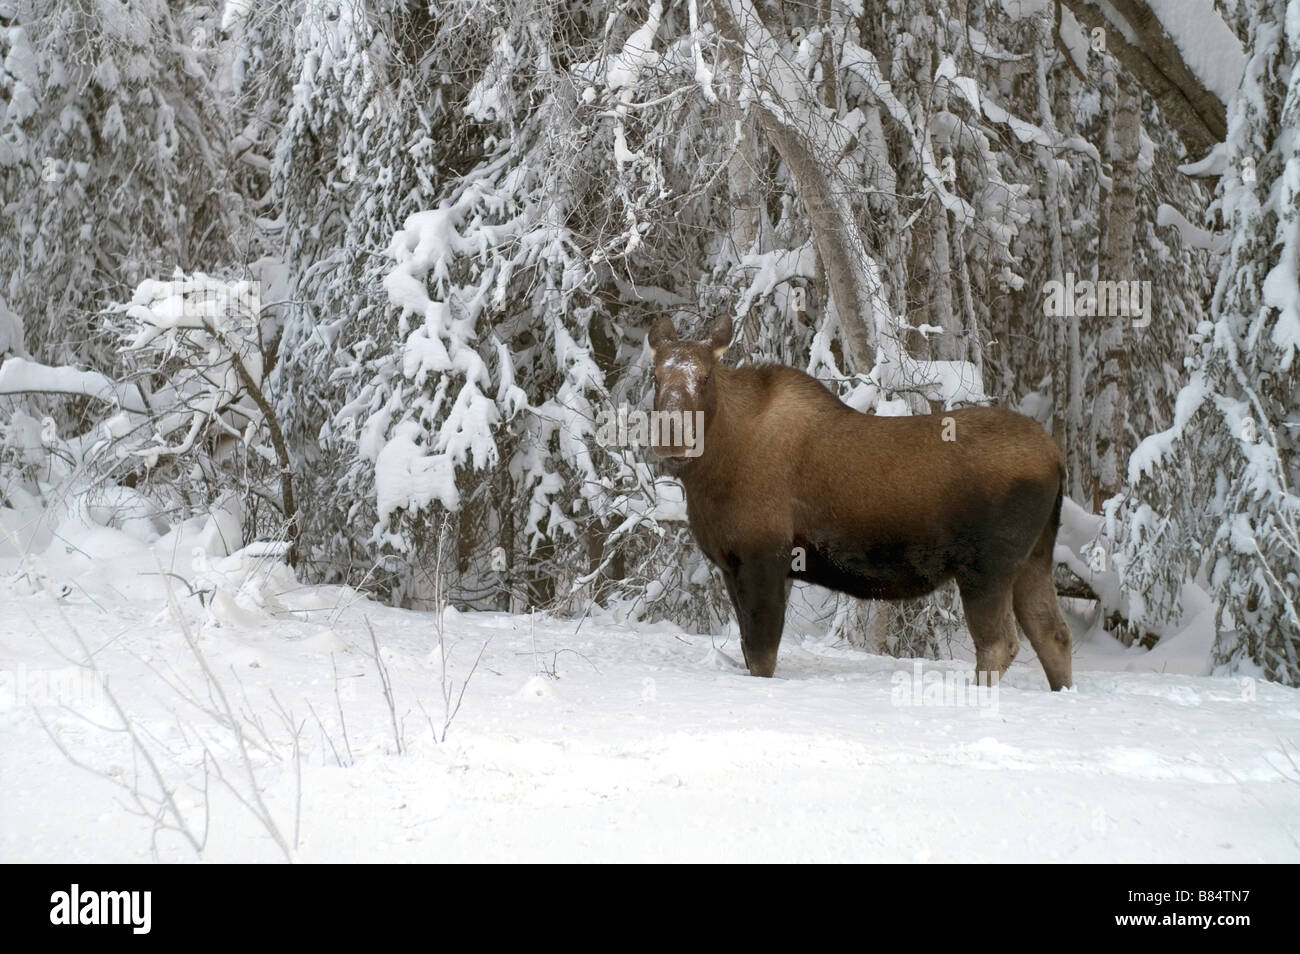 Moose Feeds on branches at tree line in winter snow Stock Photo